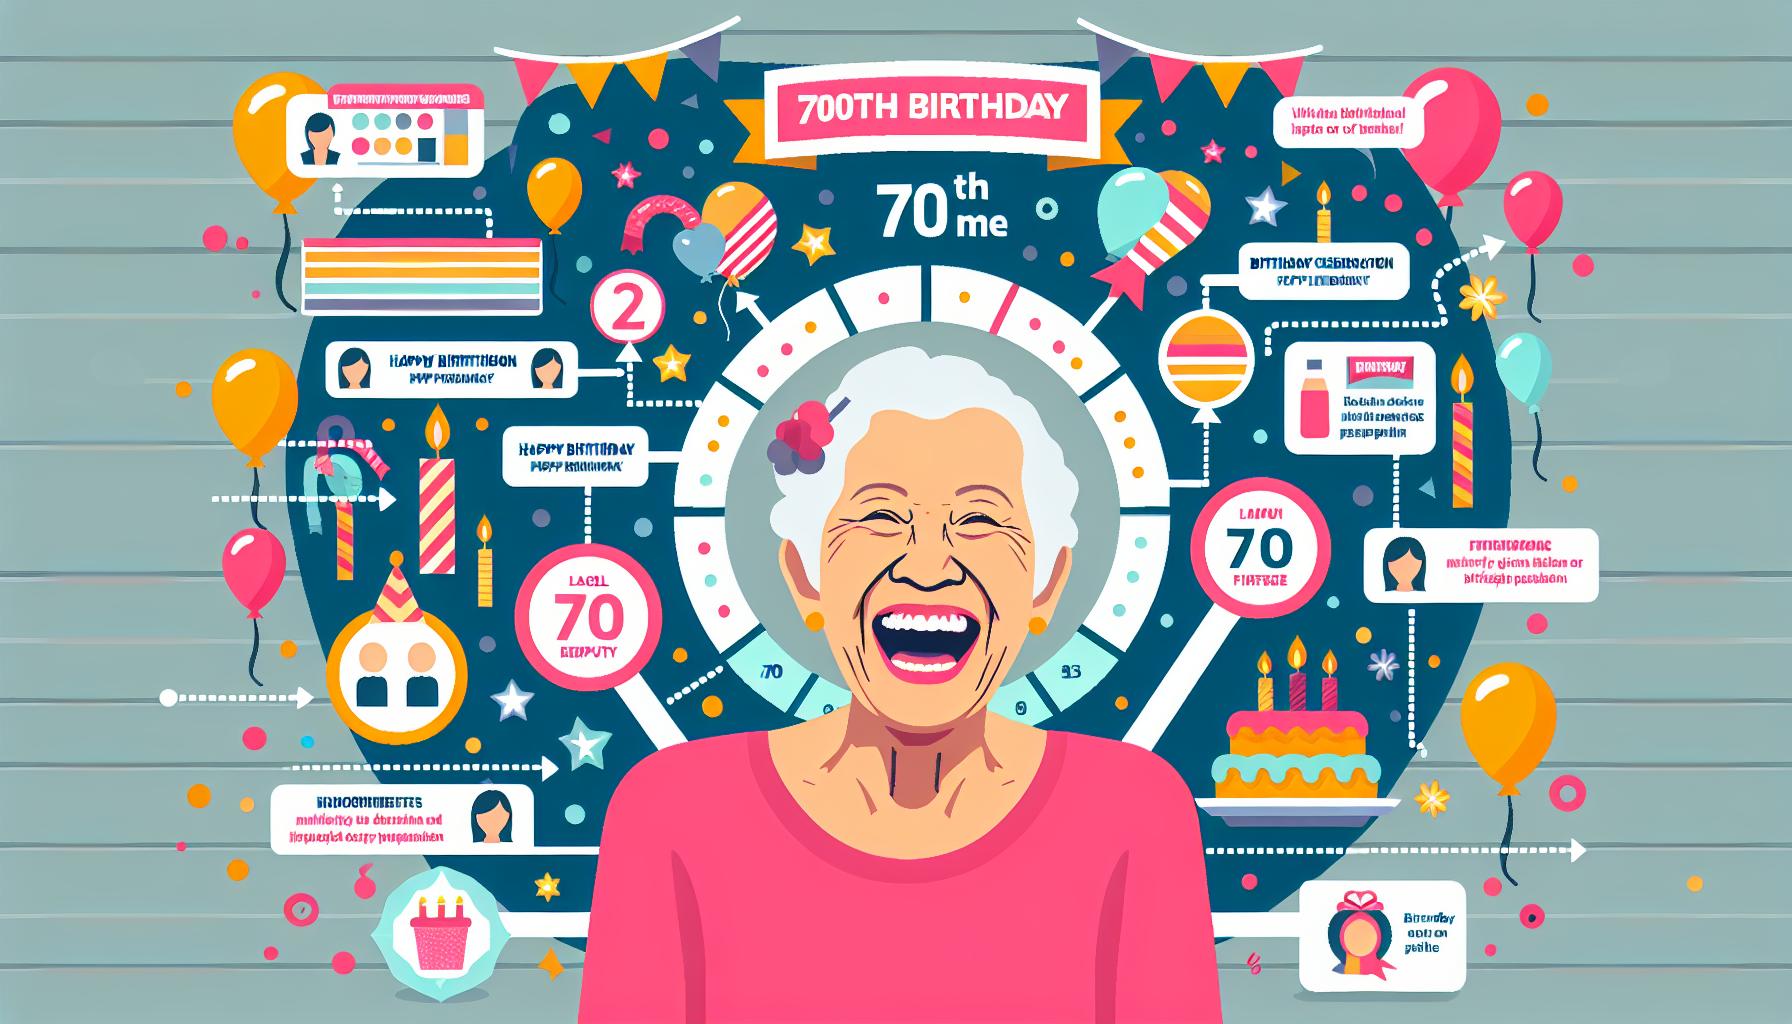 Expressing Love & Laughter: Thoughtful & Funny 70th Birthday Wishes for Mum